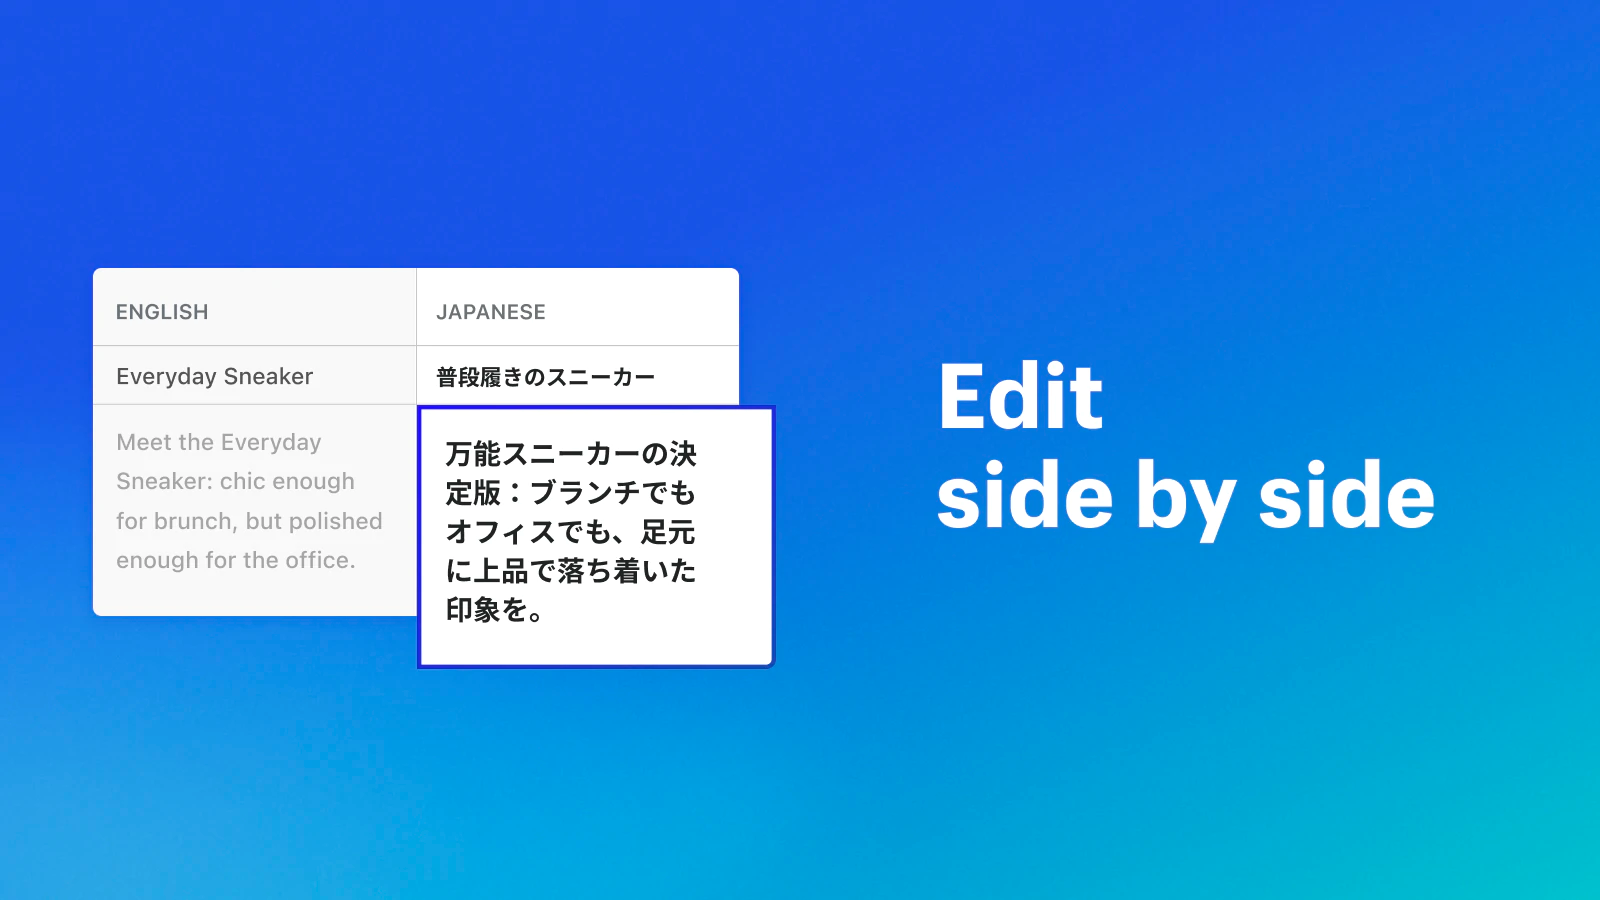 Promotional banner that shows the possibility to edit slide by slide